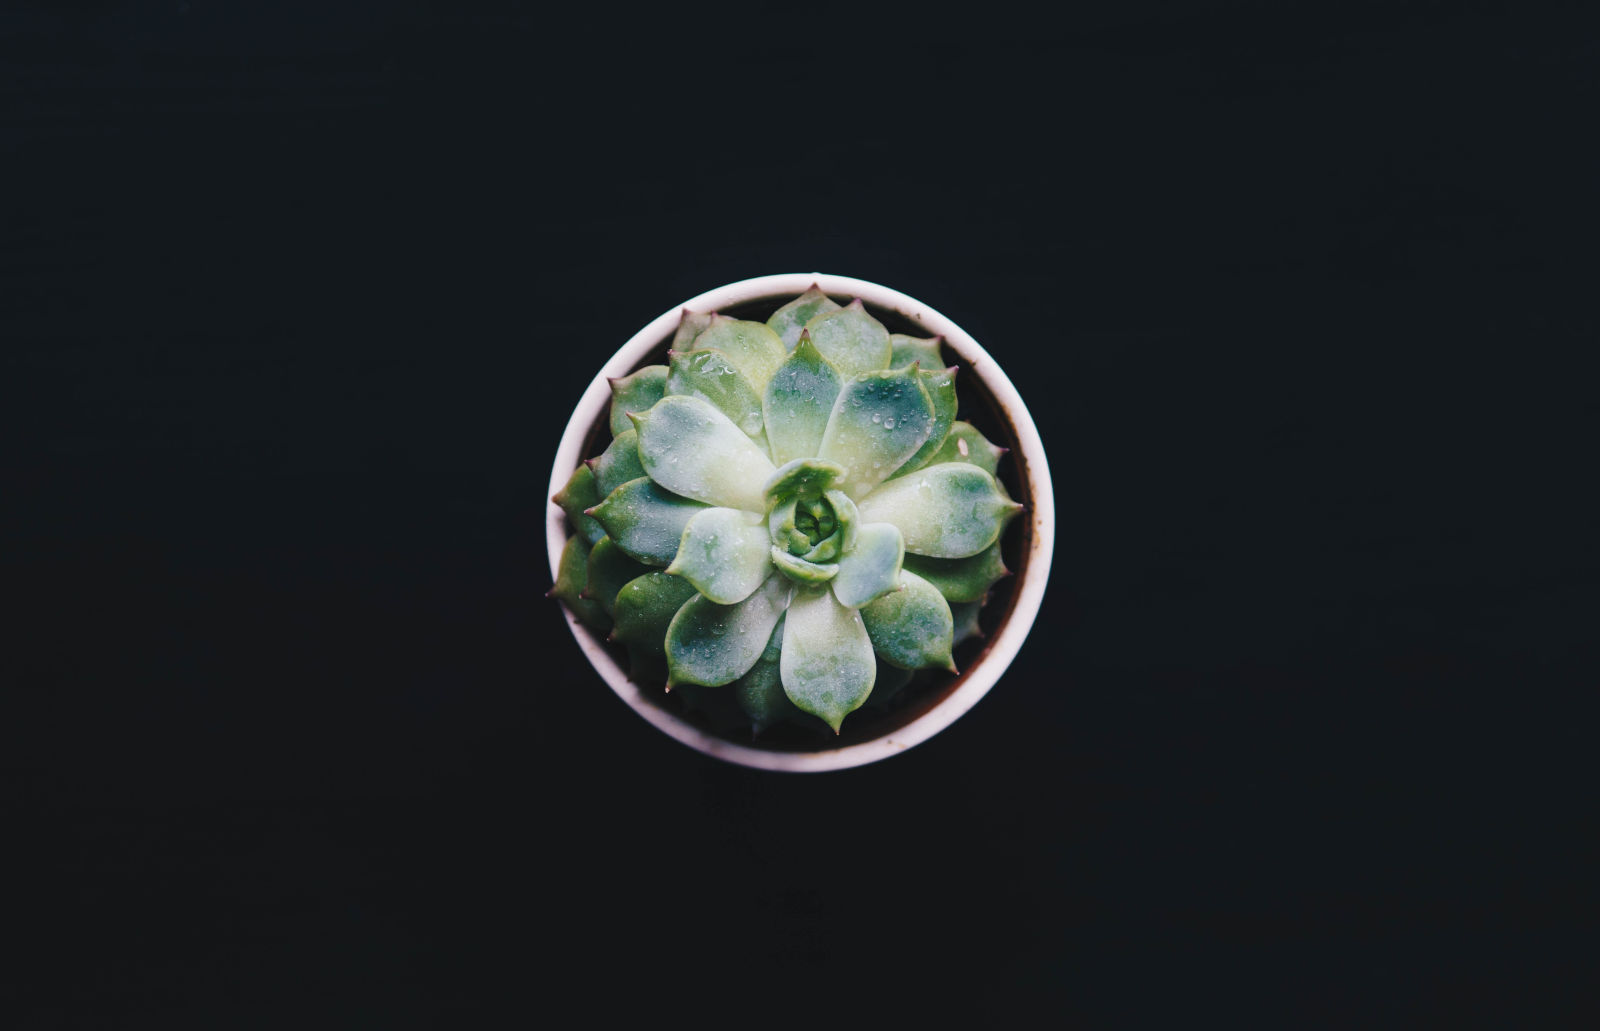 Minimalism and beauty of succulent (it also feels like fractal)